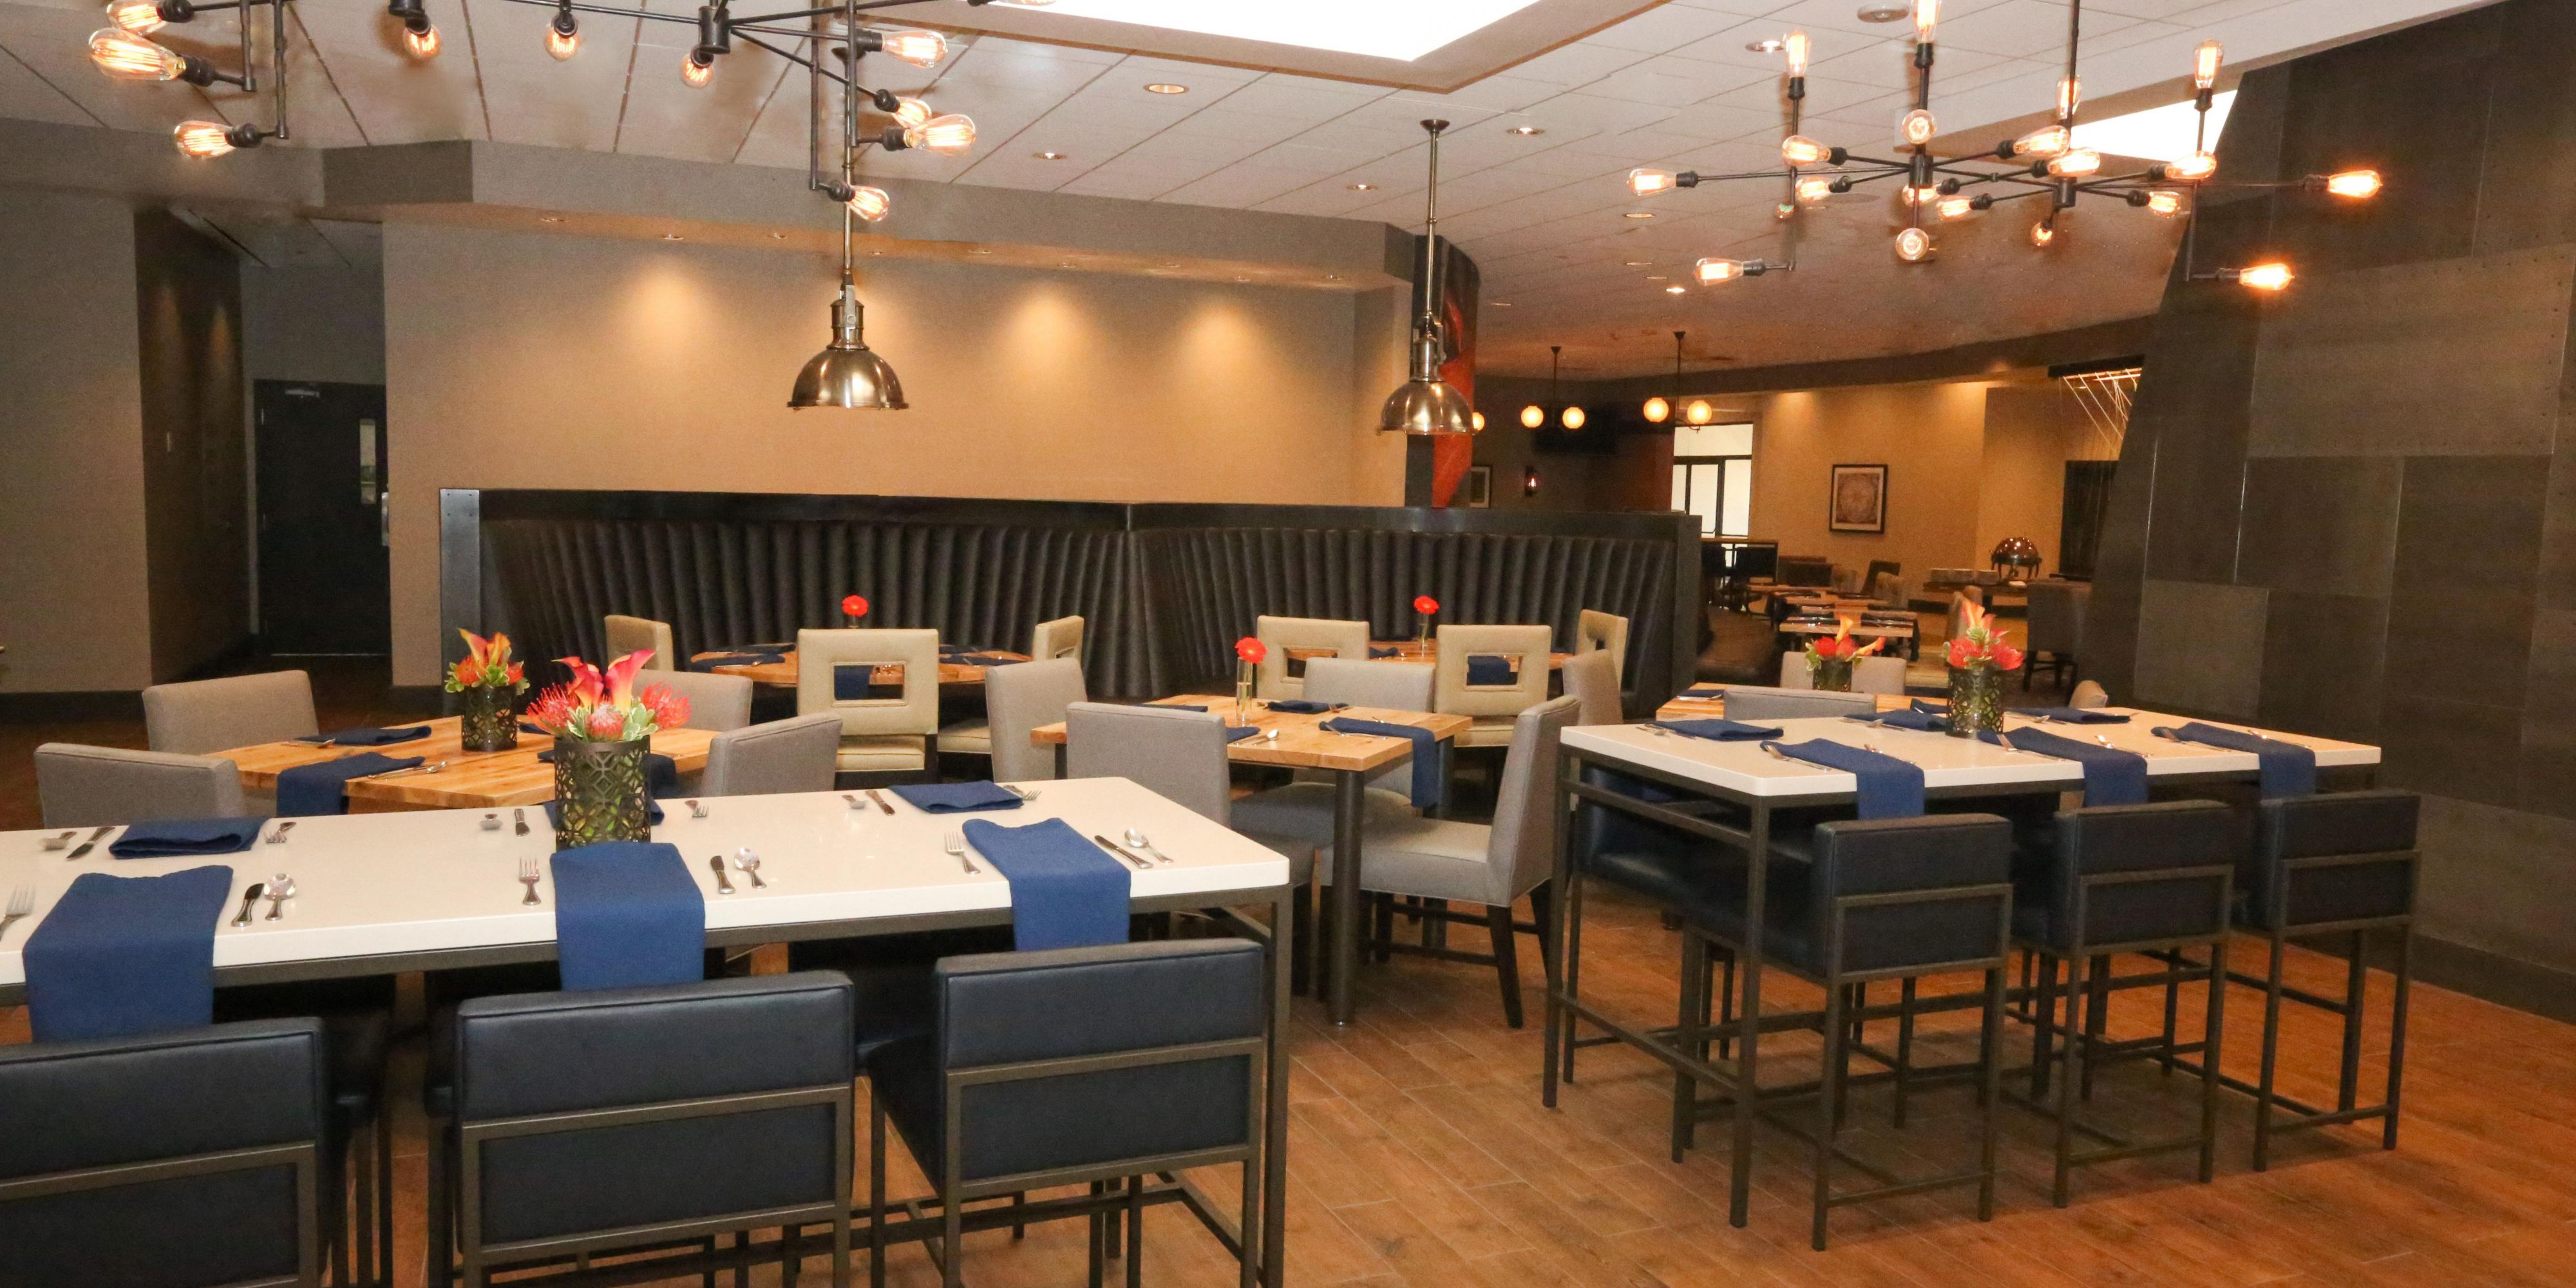 High top tables is the setting for a casual dining experience.